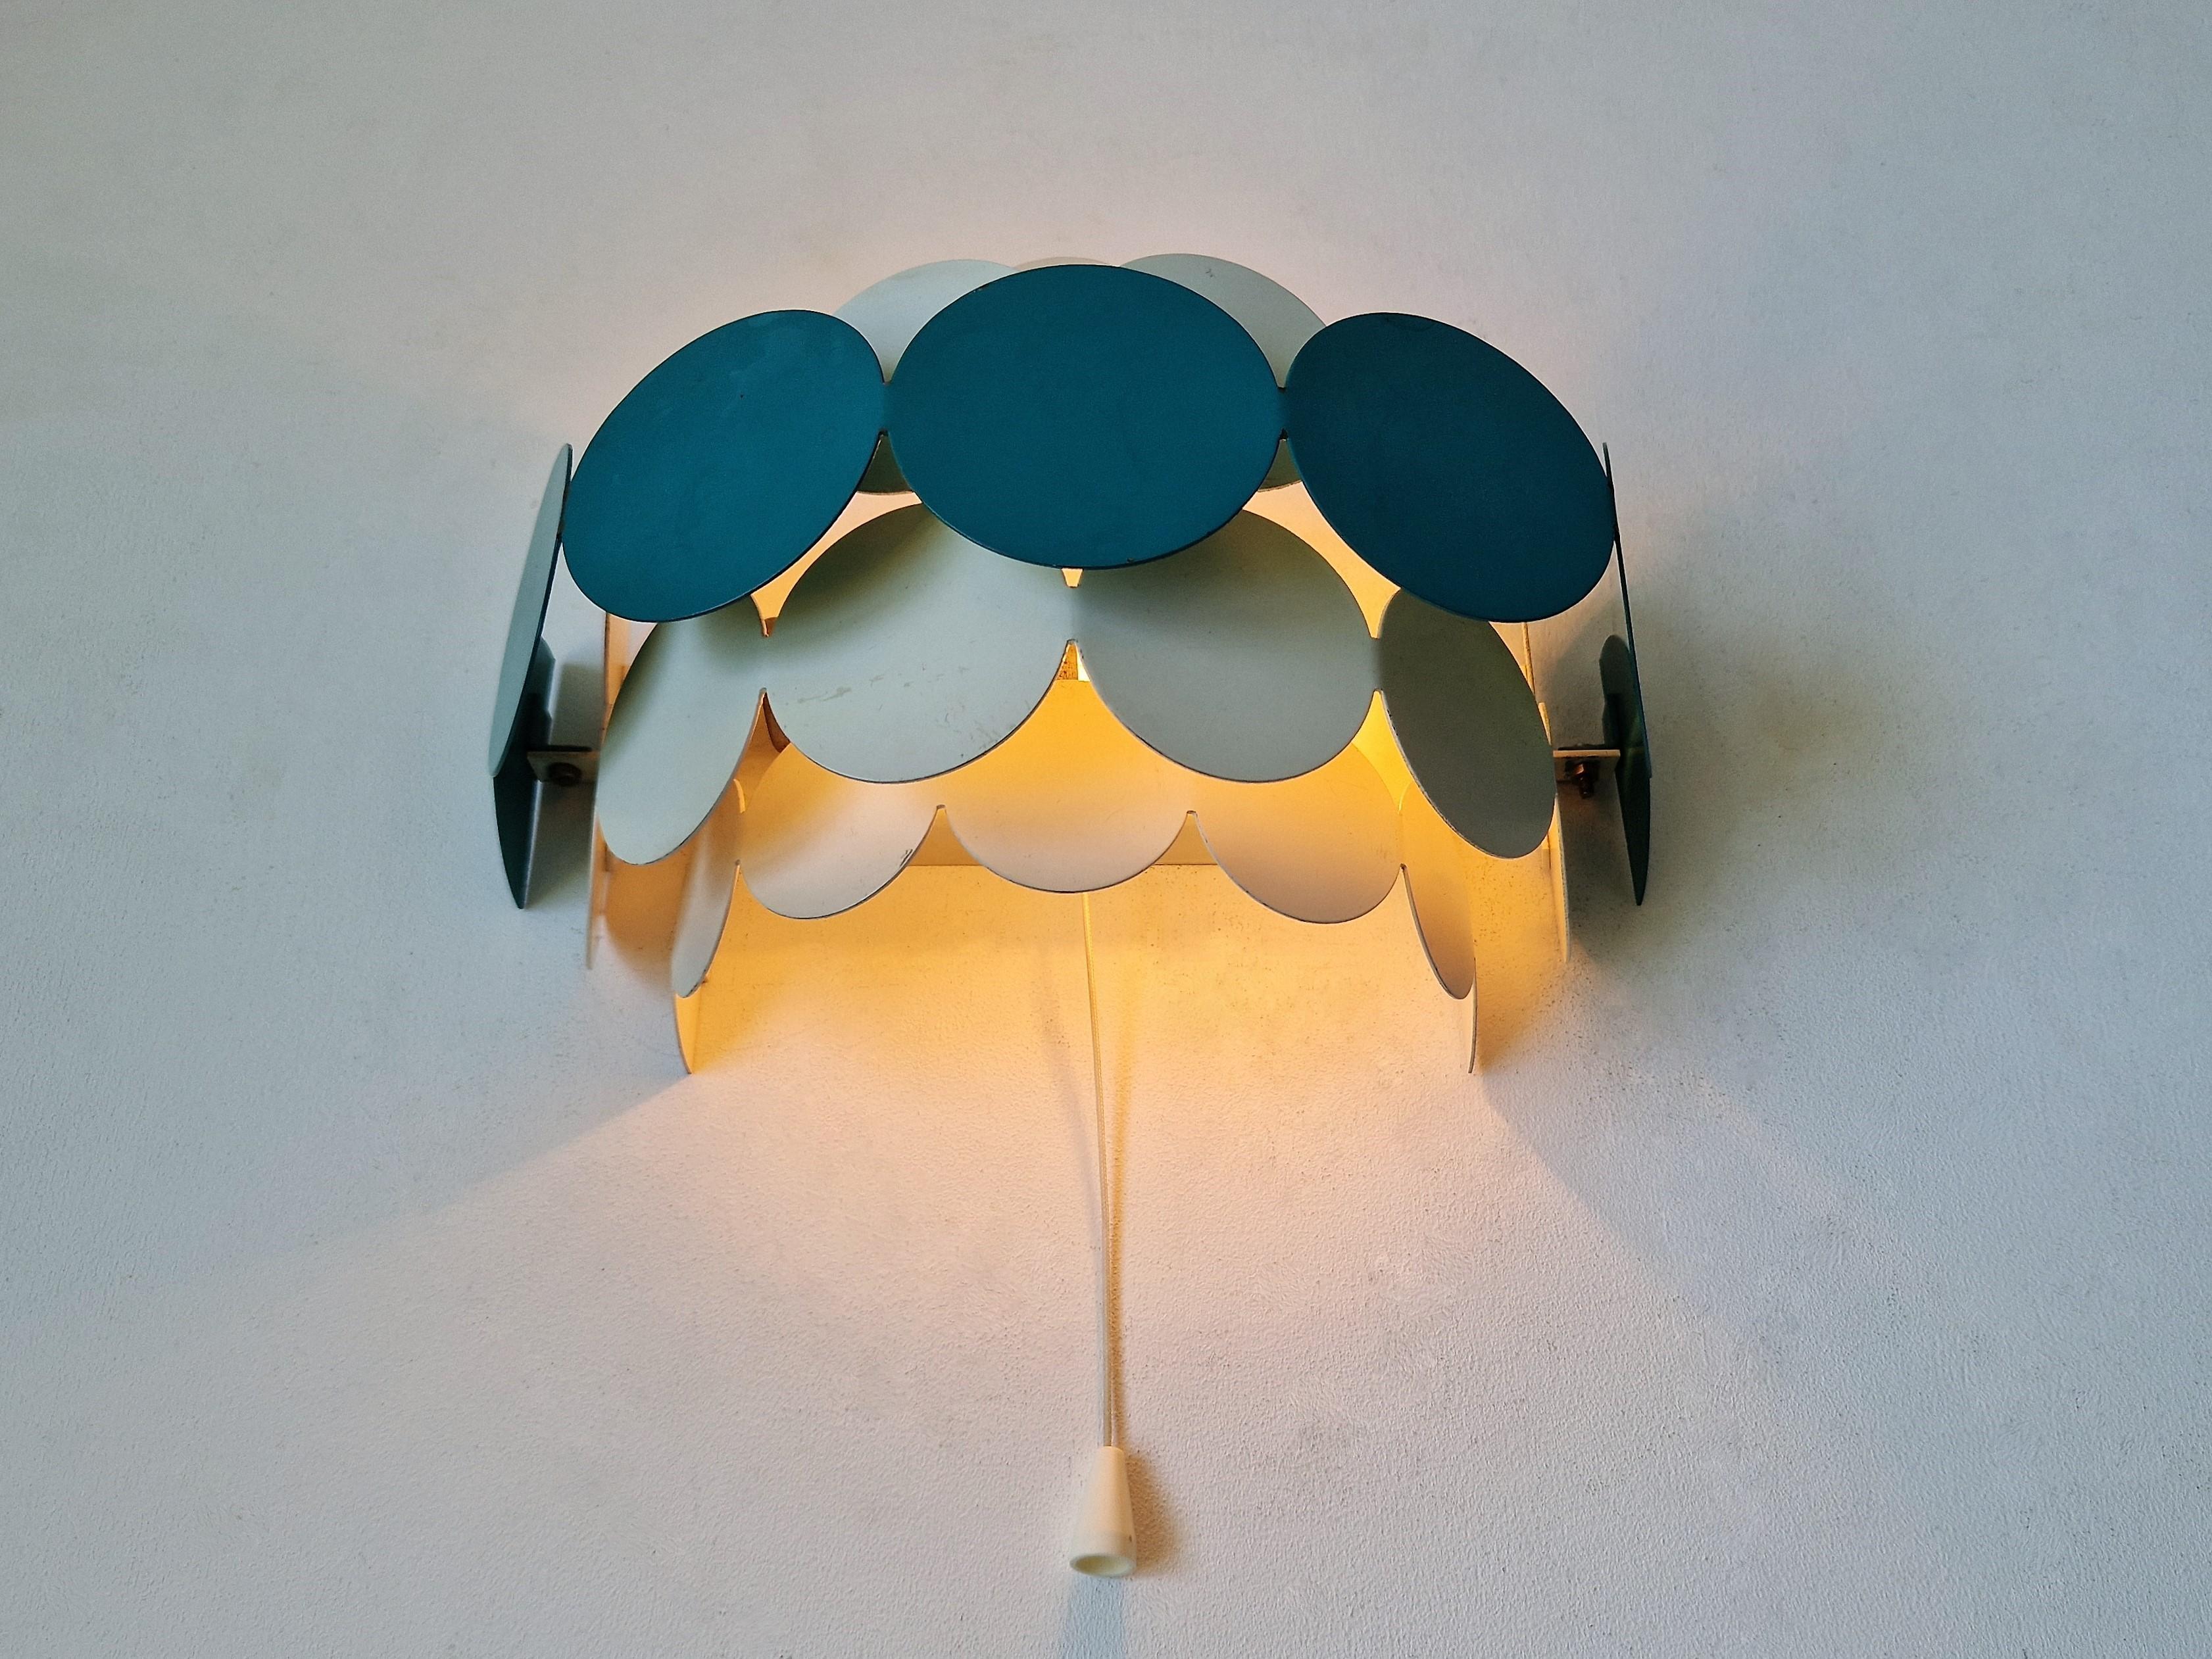 Bright Petrol and White Wall Lamps by Doria Leuchten, Germany 1960's/1970's For Sale 1